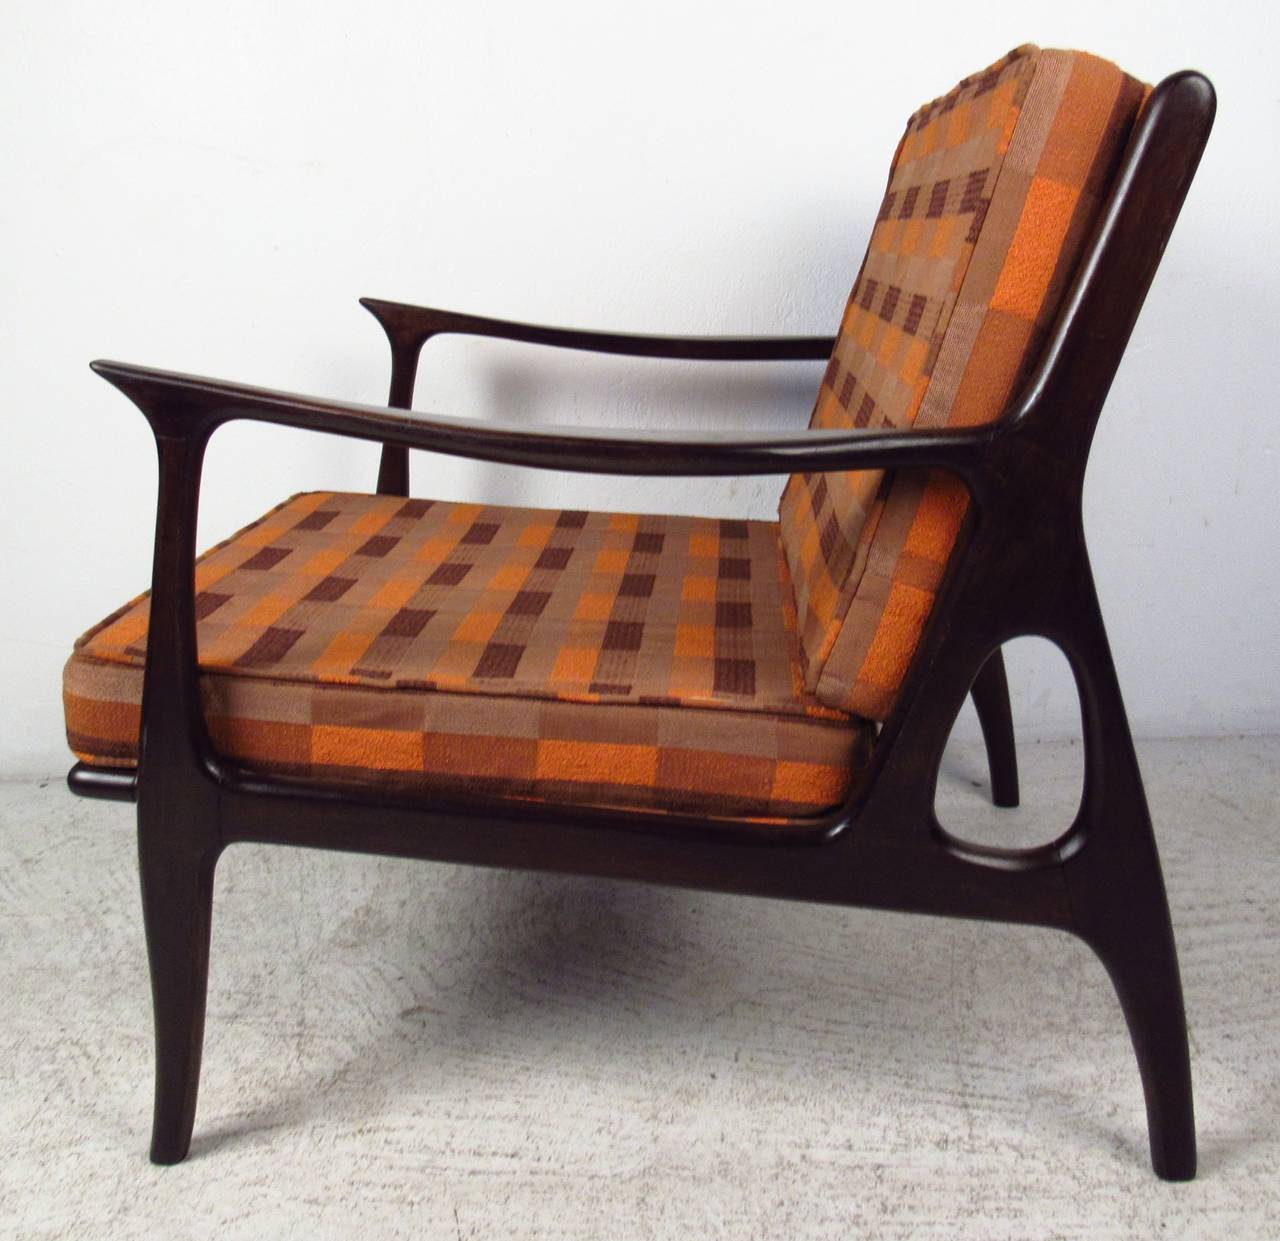 Classic Mid-Century Modern lounge chair in walnut. A sleek design with a sculpted frame, curved armrests, and a vertical slatted backrest. This attractive arm chair boasts overstuffed removable cushions covered in a plush orange upholstery. A